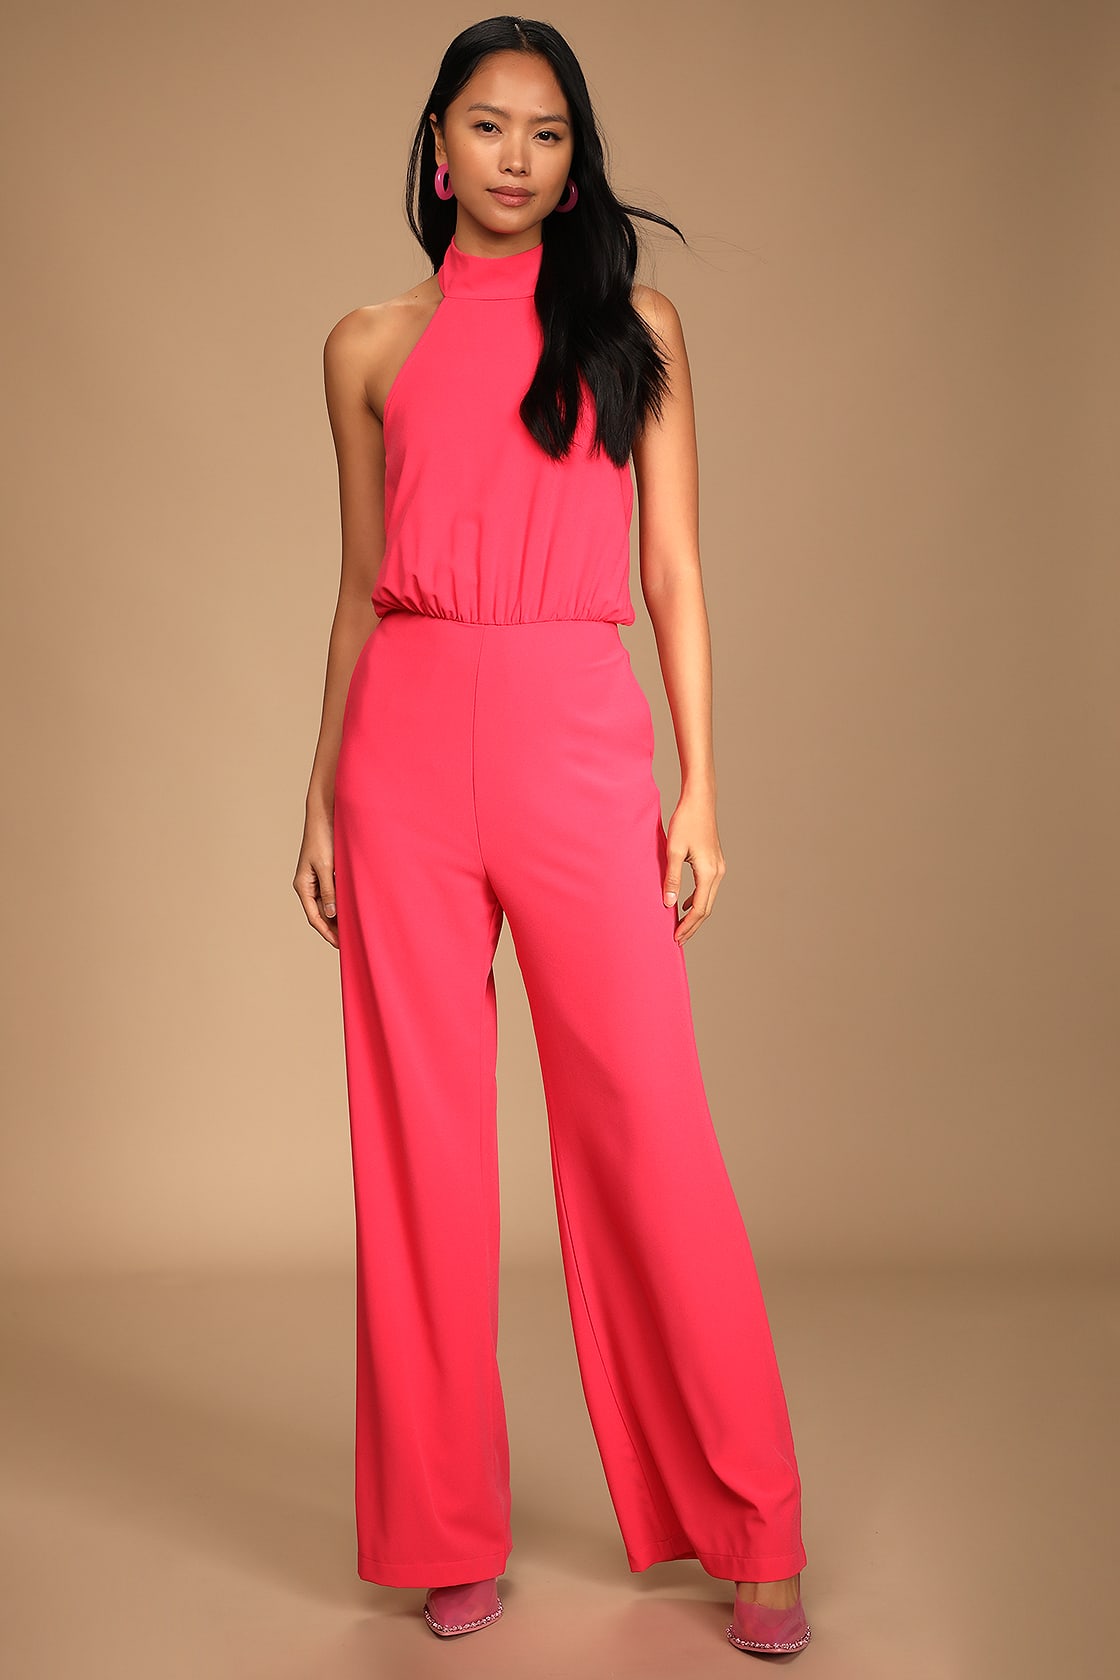 Moment for Life Coral Pink Halter Jumpsuit